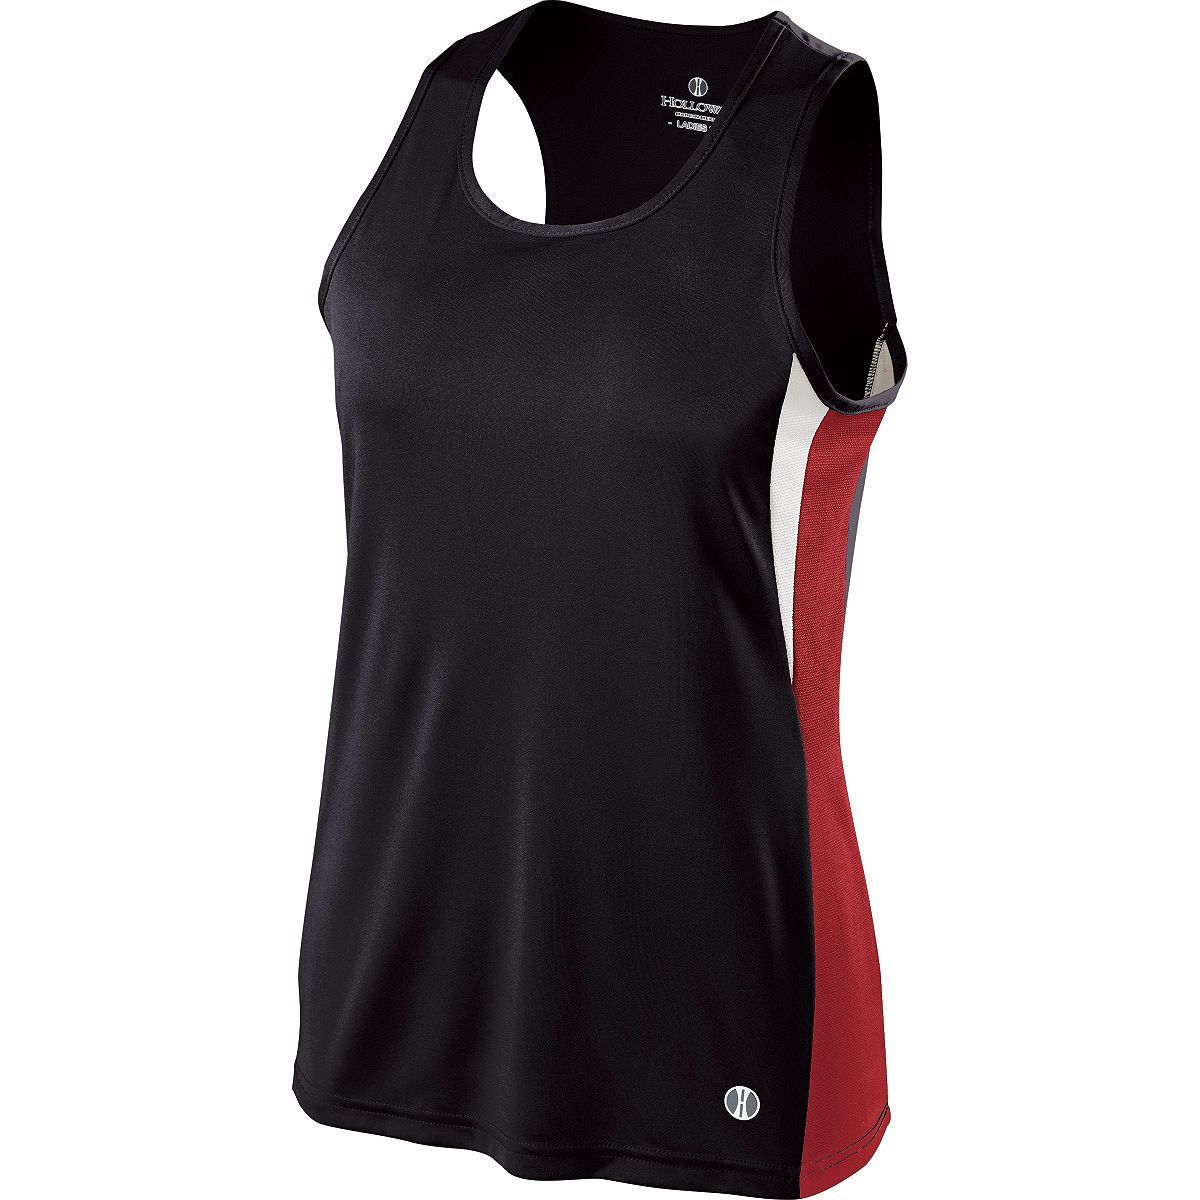 Holloway Ladies Vertical Singlet in Black/Scarlet/White  -Part of the Ladies, Track-Field, Holloway, Shirts product lines at KanaleyCreations.com